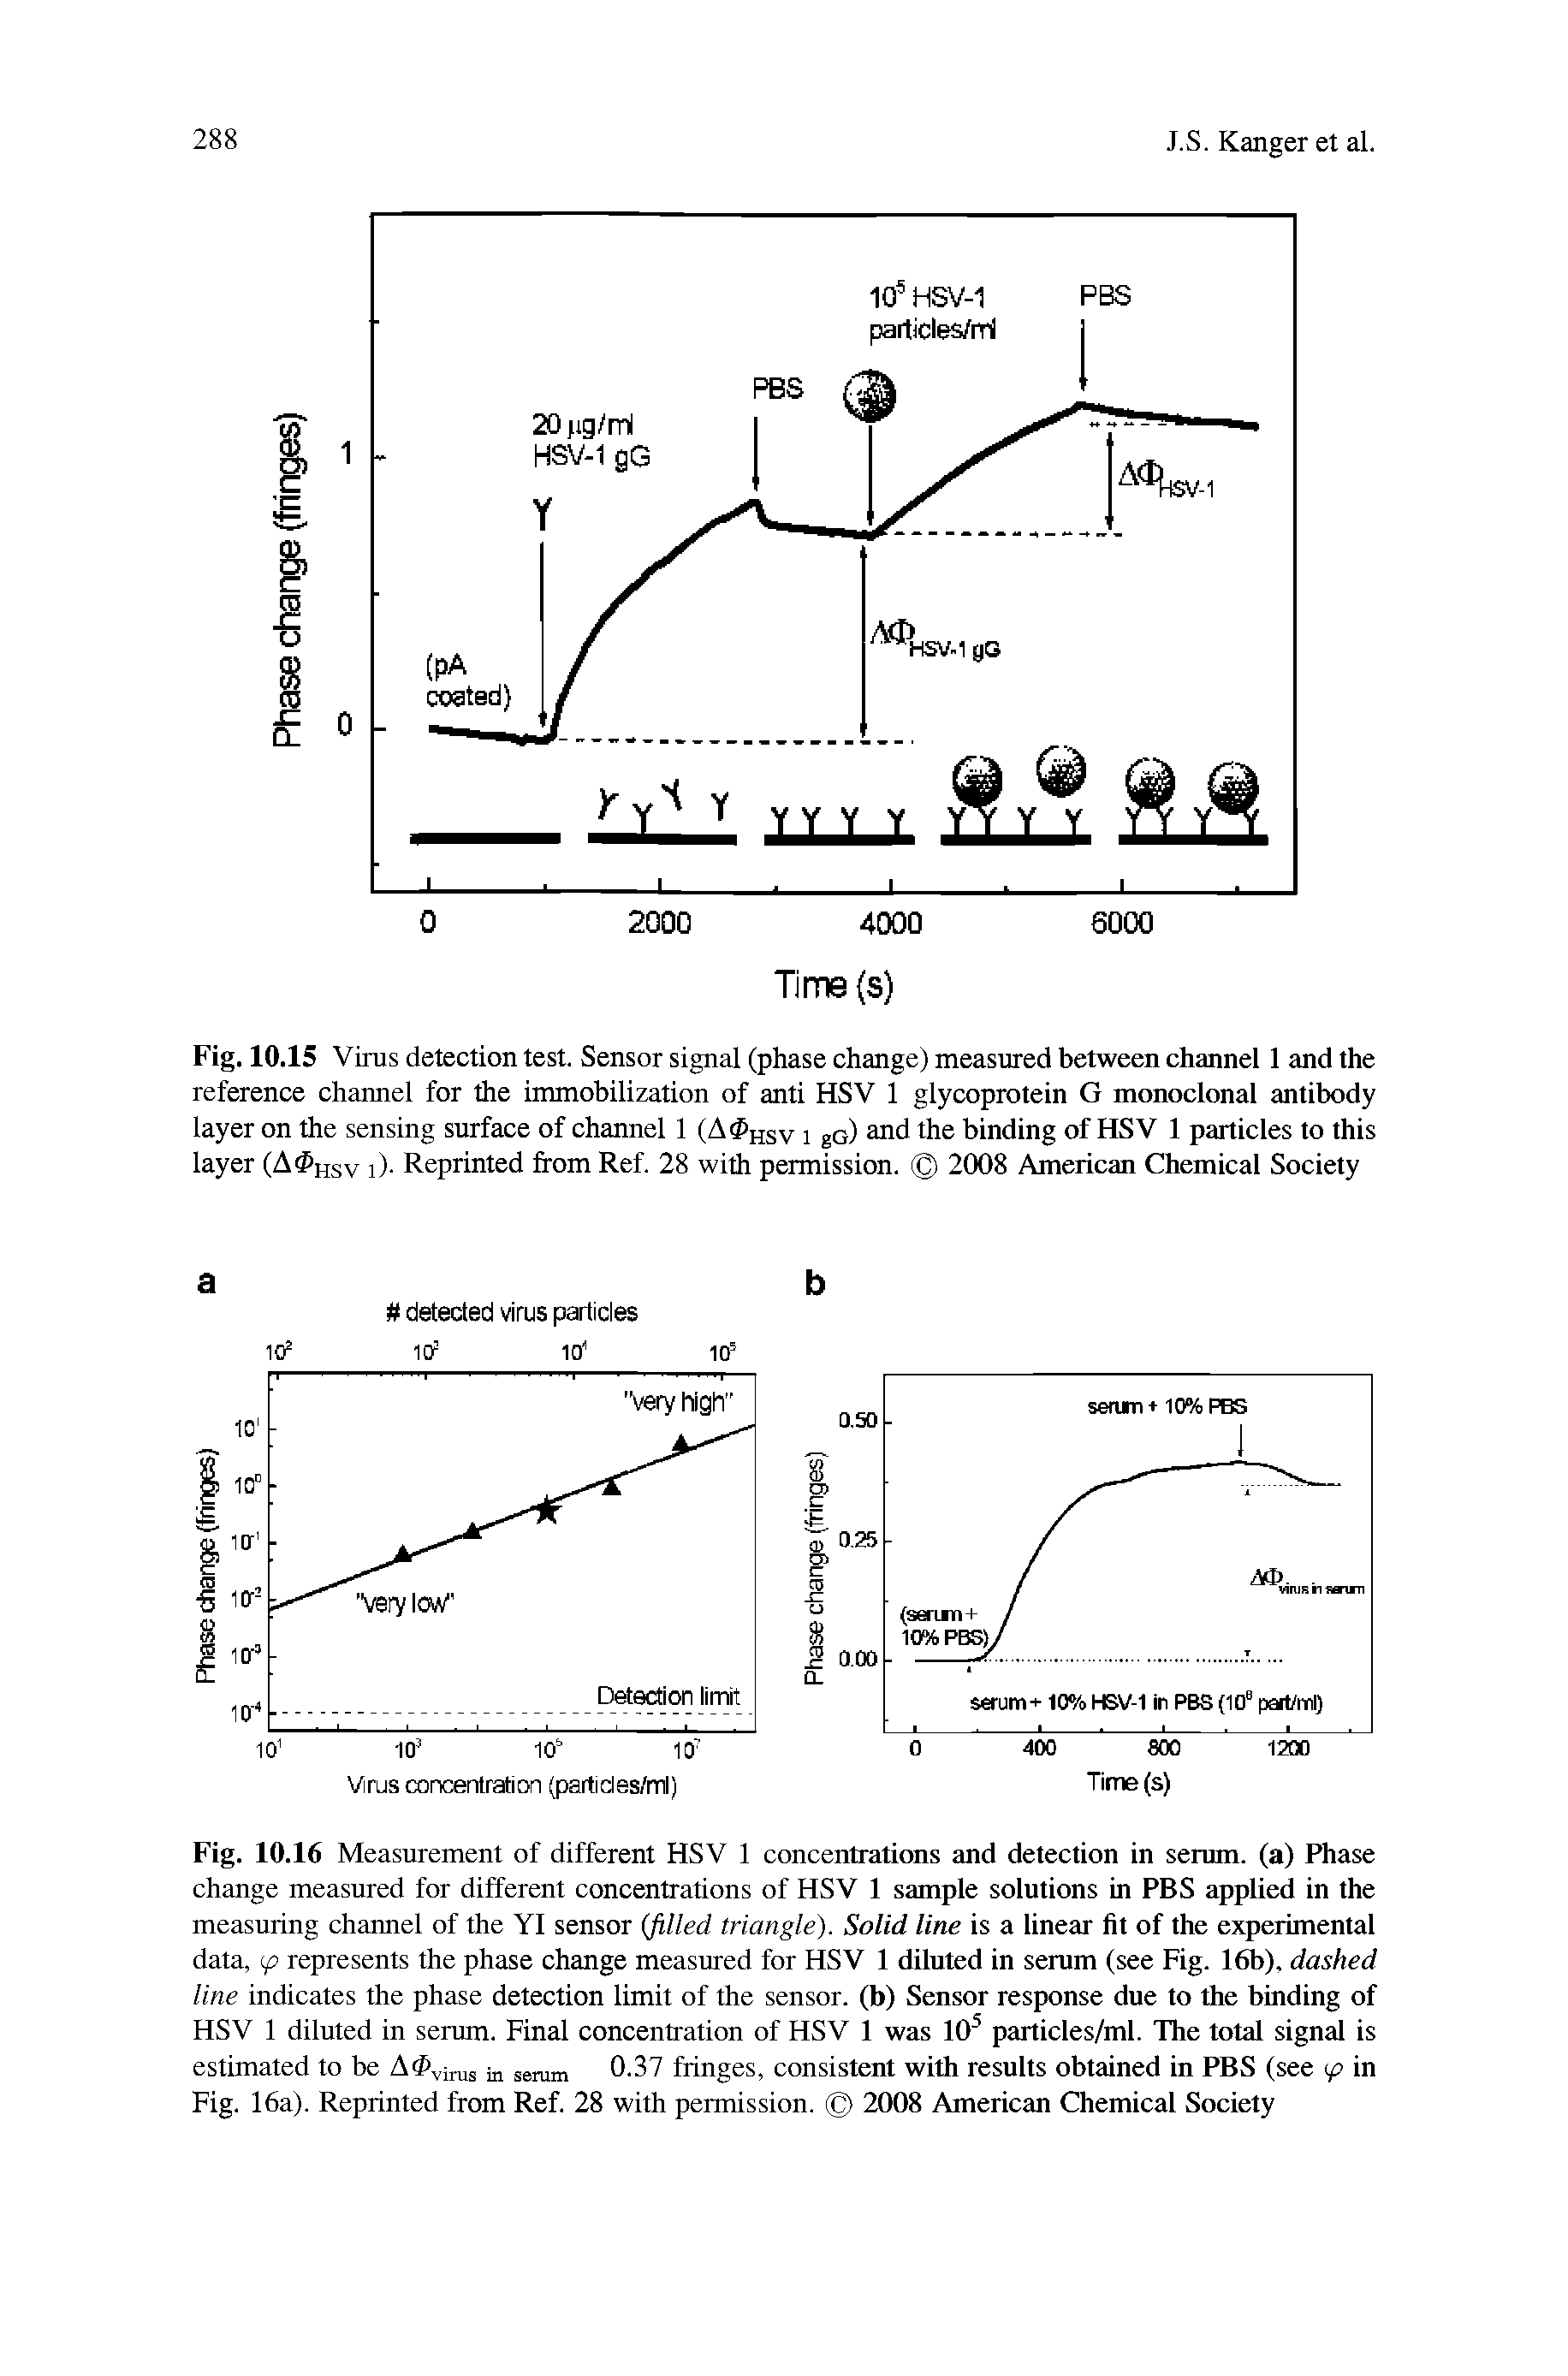 Fig. 10.15 Virus detection test. Sensor signal (phase change) measured between channel 1 and the reference channel for the immobilization of anti HSV 1 glycoprotein G monoclonal antibody layer on the sensing surface of channel 1 (A HSV i gG) and the binding of HSV 1 particles to this layer (A IISV i). Reprinted from Ref. 28 with permission. 2008 American Chemical Society...